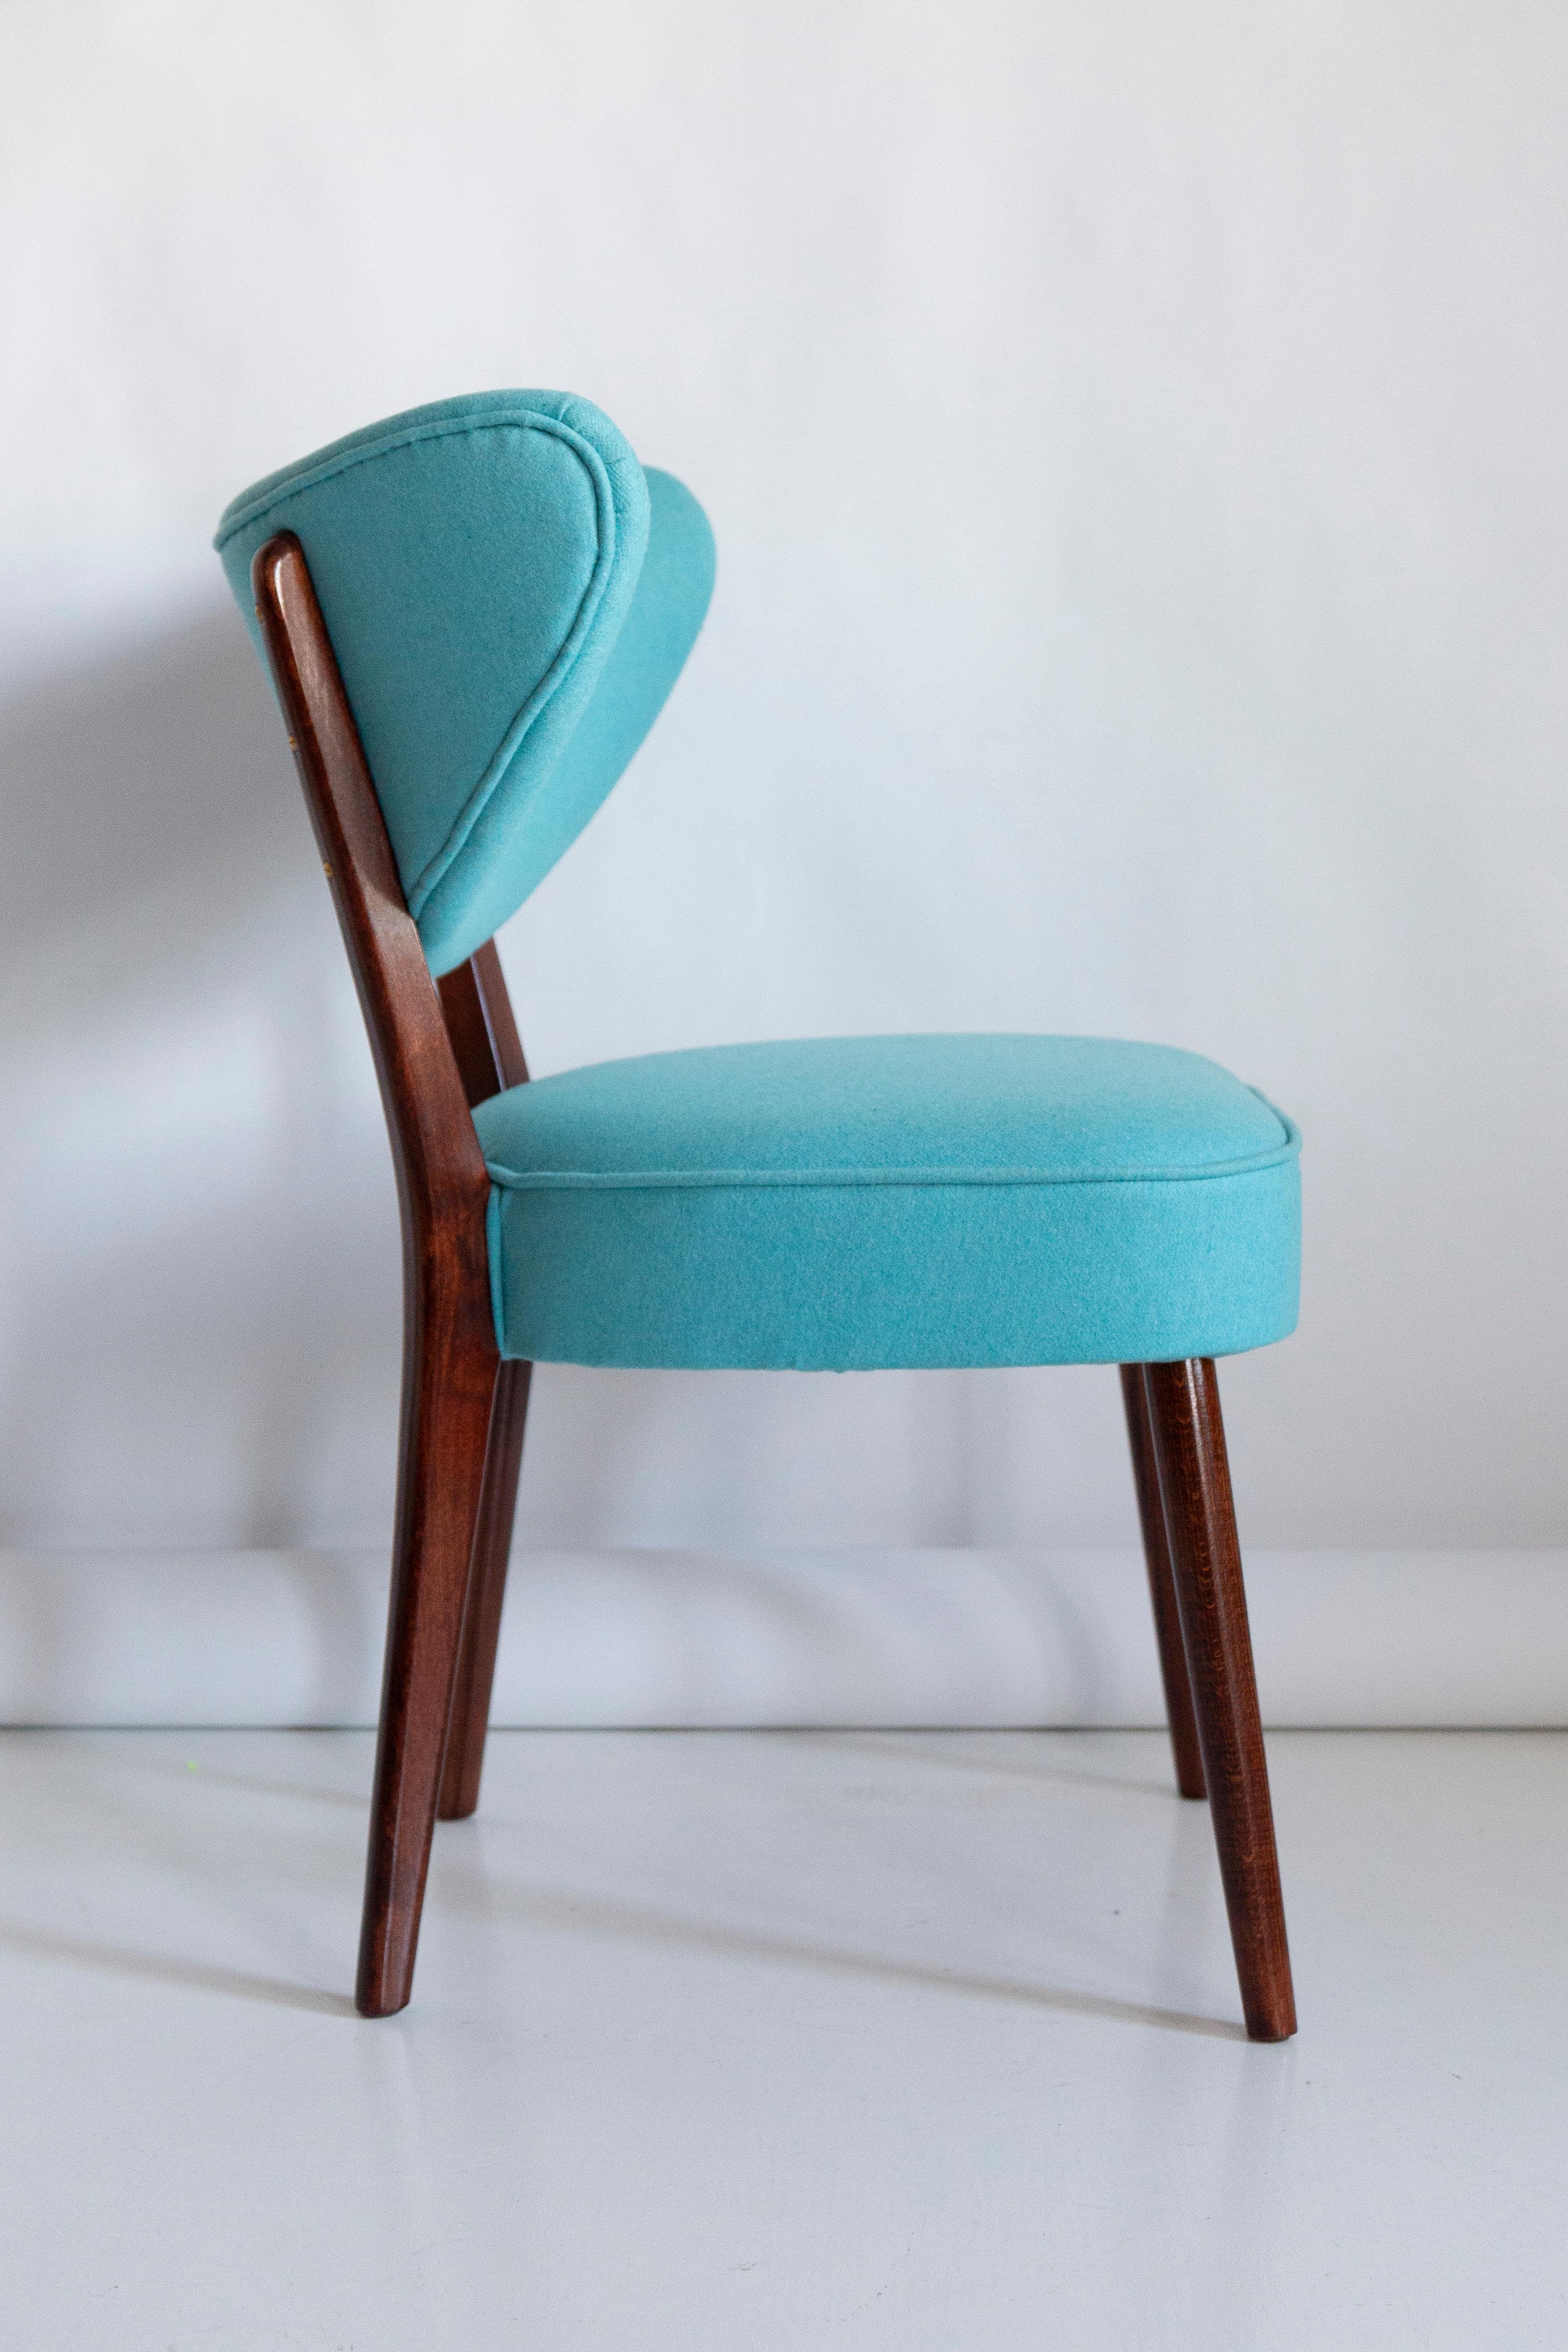 Contemporary Shell Dining Chair, Turquoise Wool, by Vintola Studio, Europe, Poland For Sale